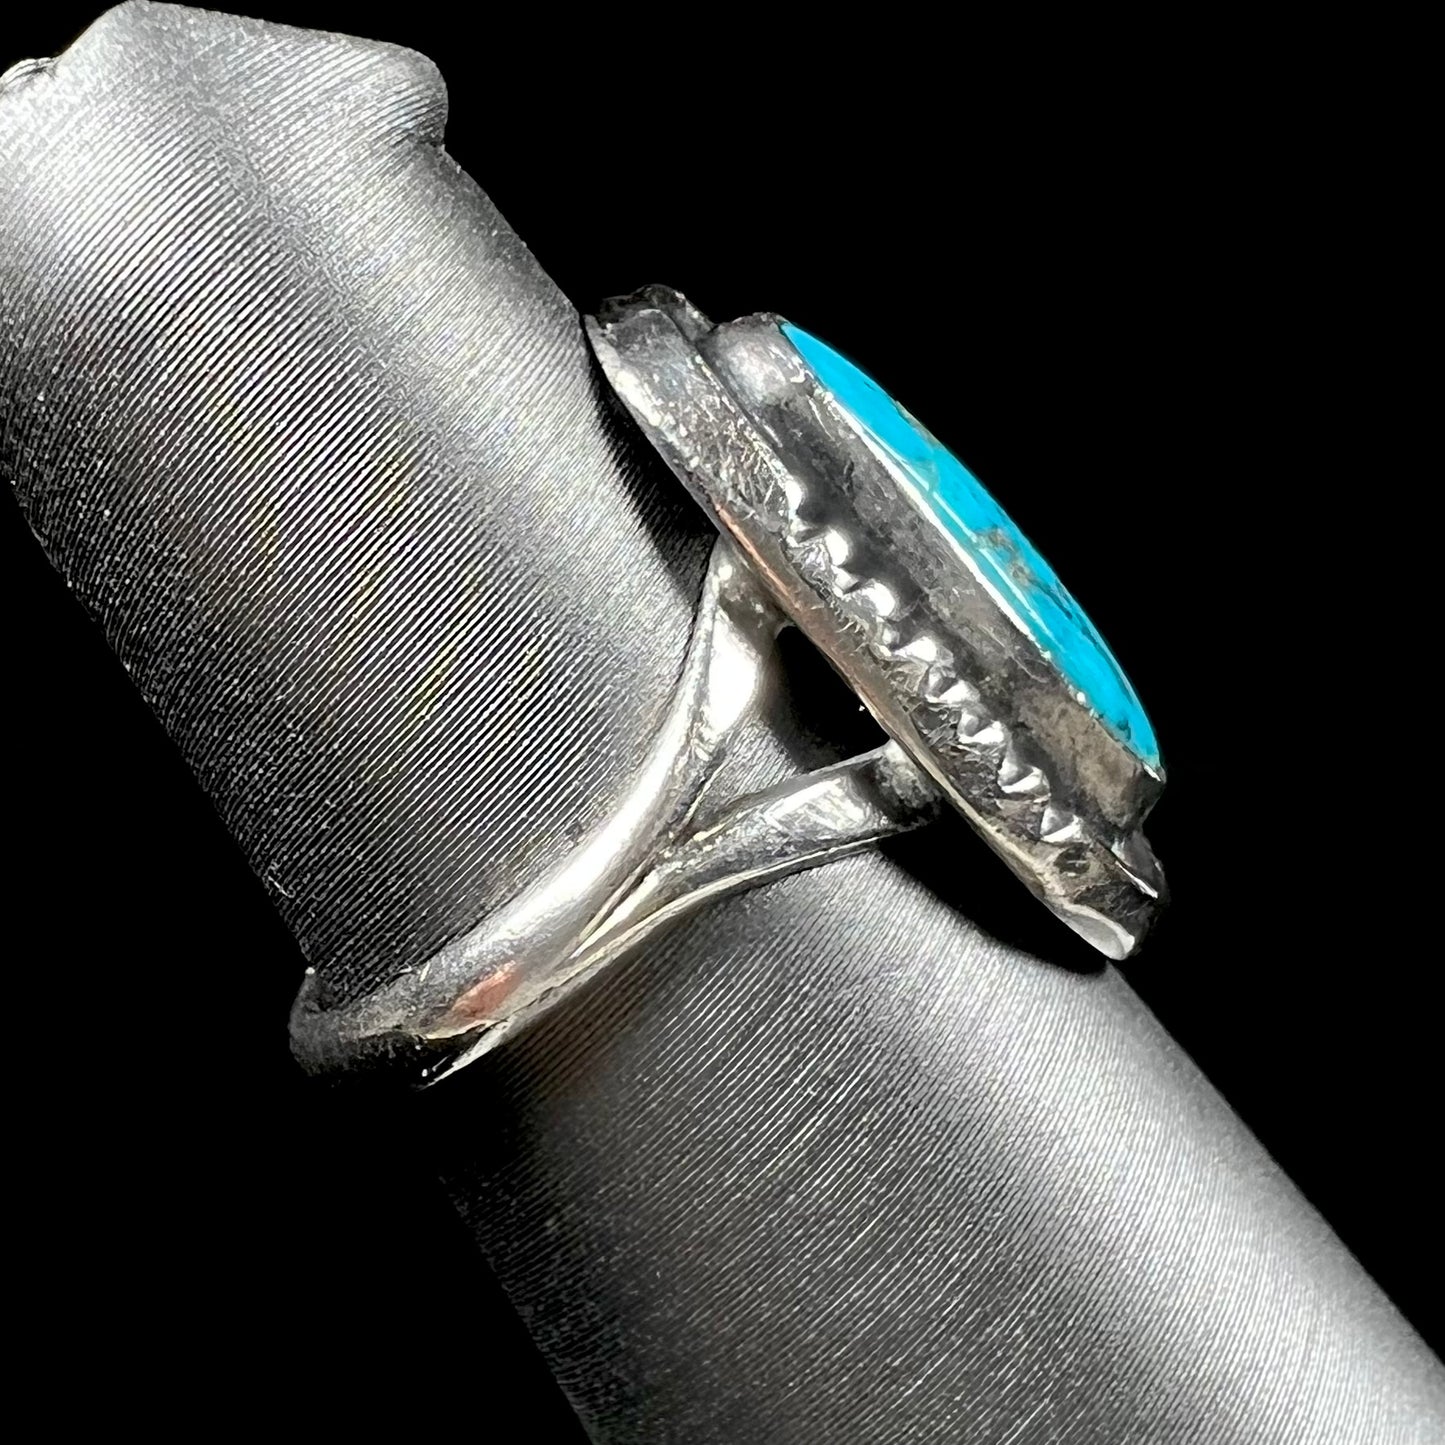 A handmade sterling silver Navajo style ring set with a Morenci turquoise stone.